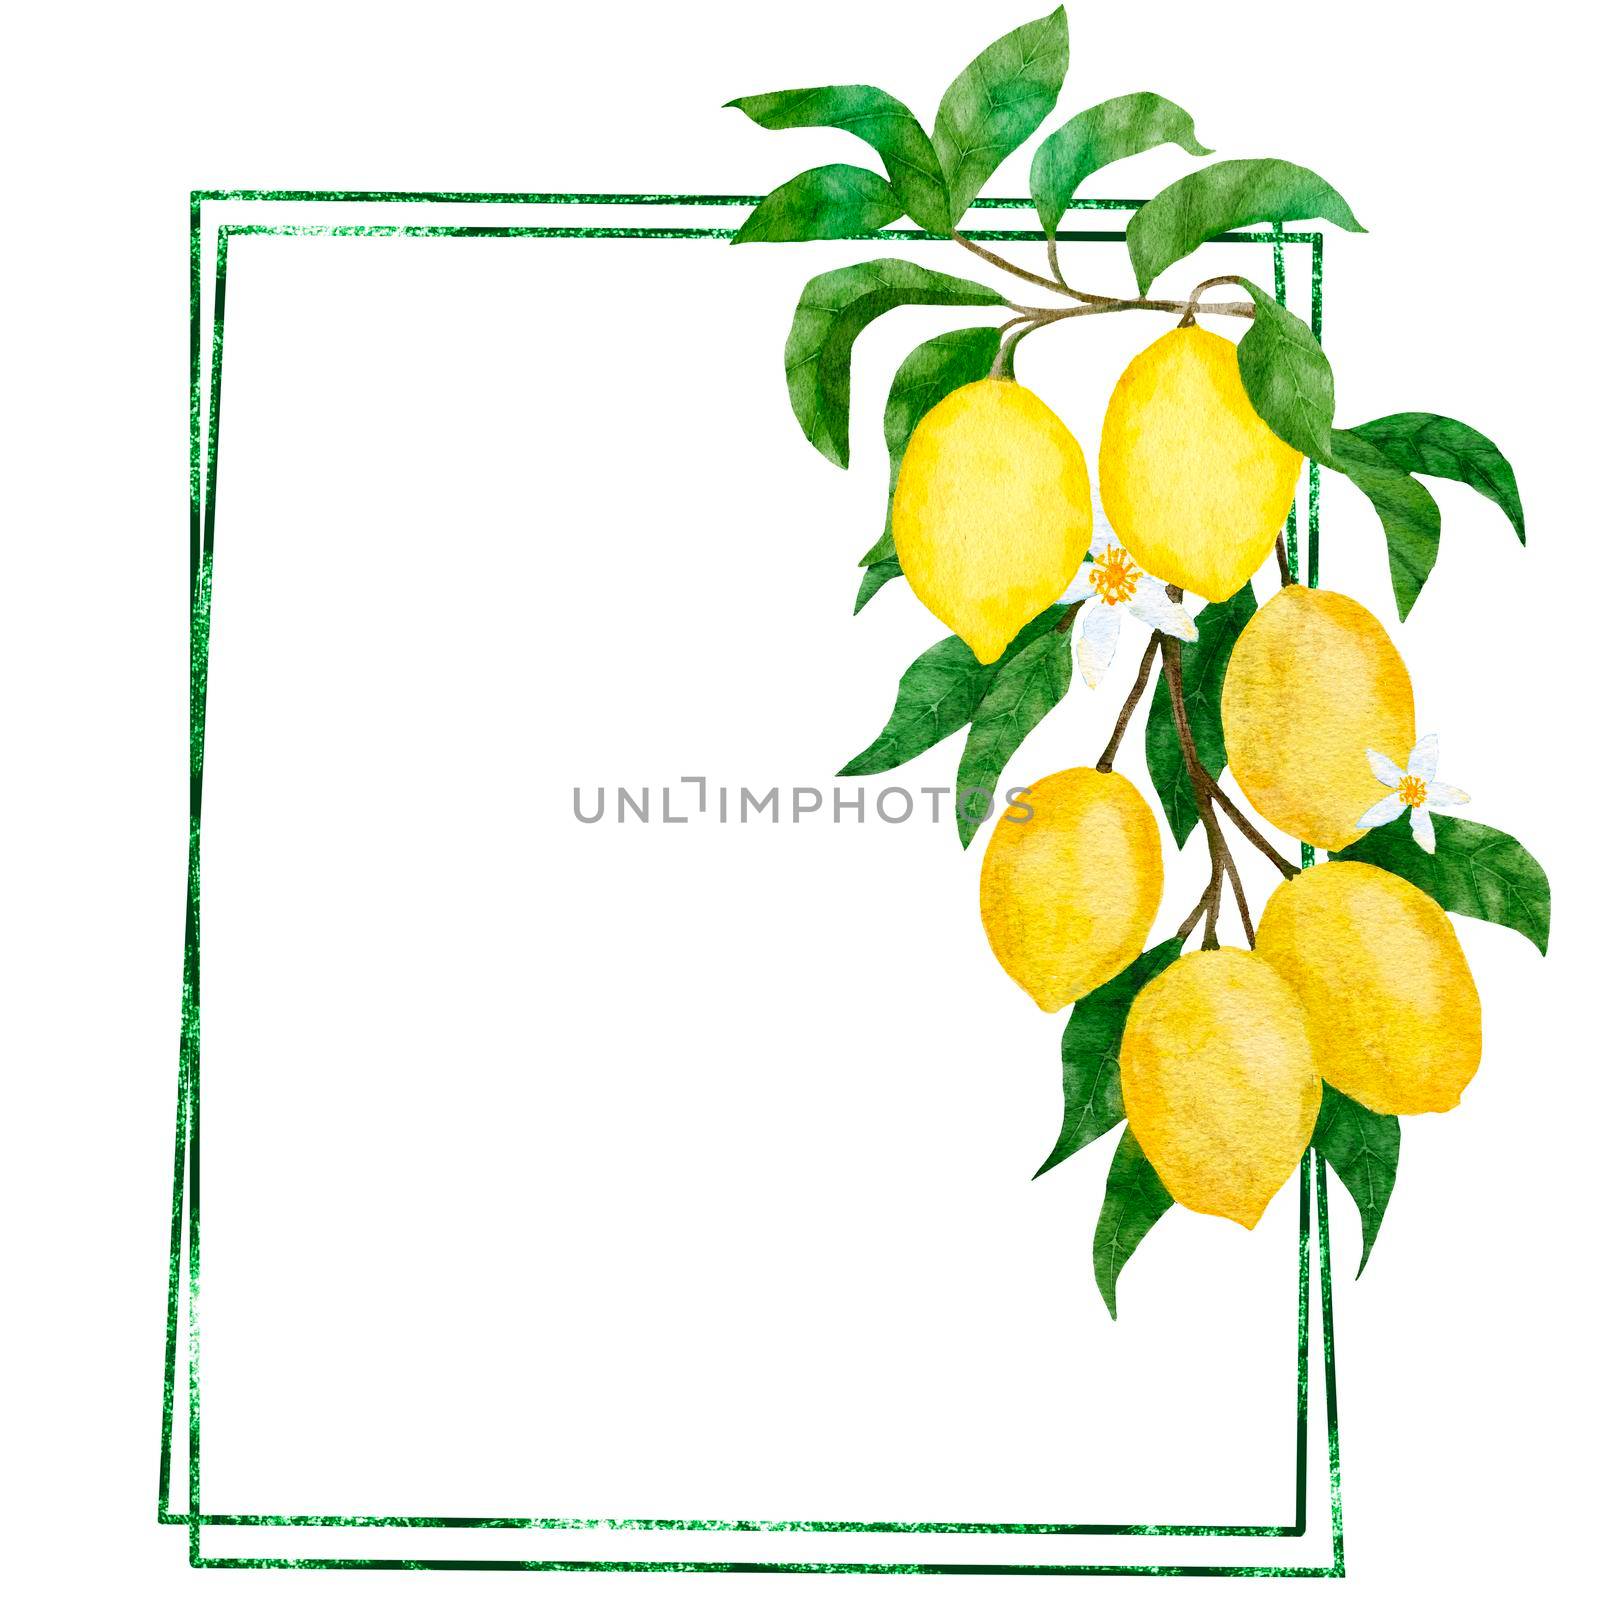 Watercolor hand drawn frame poster with yellow lemons and green leaves. Summer fruit citrus border with modern glitter lines for wedding cards invitations, nature design illustration